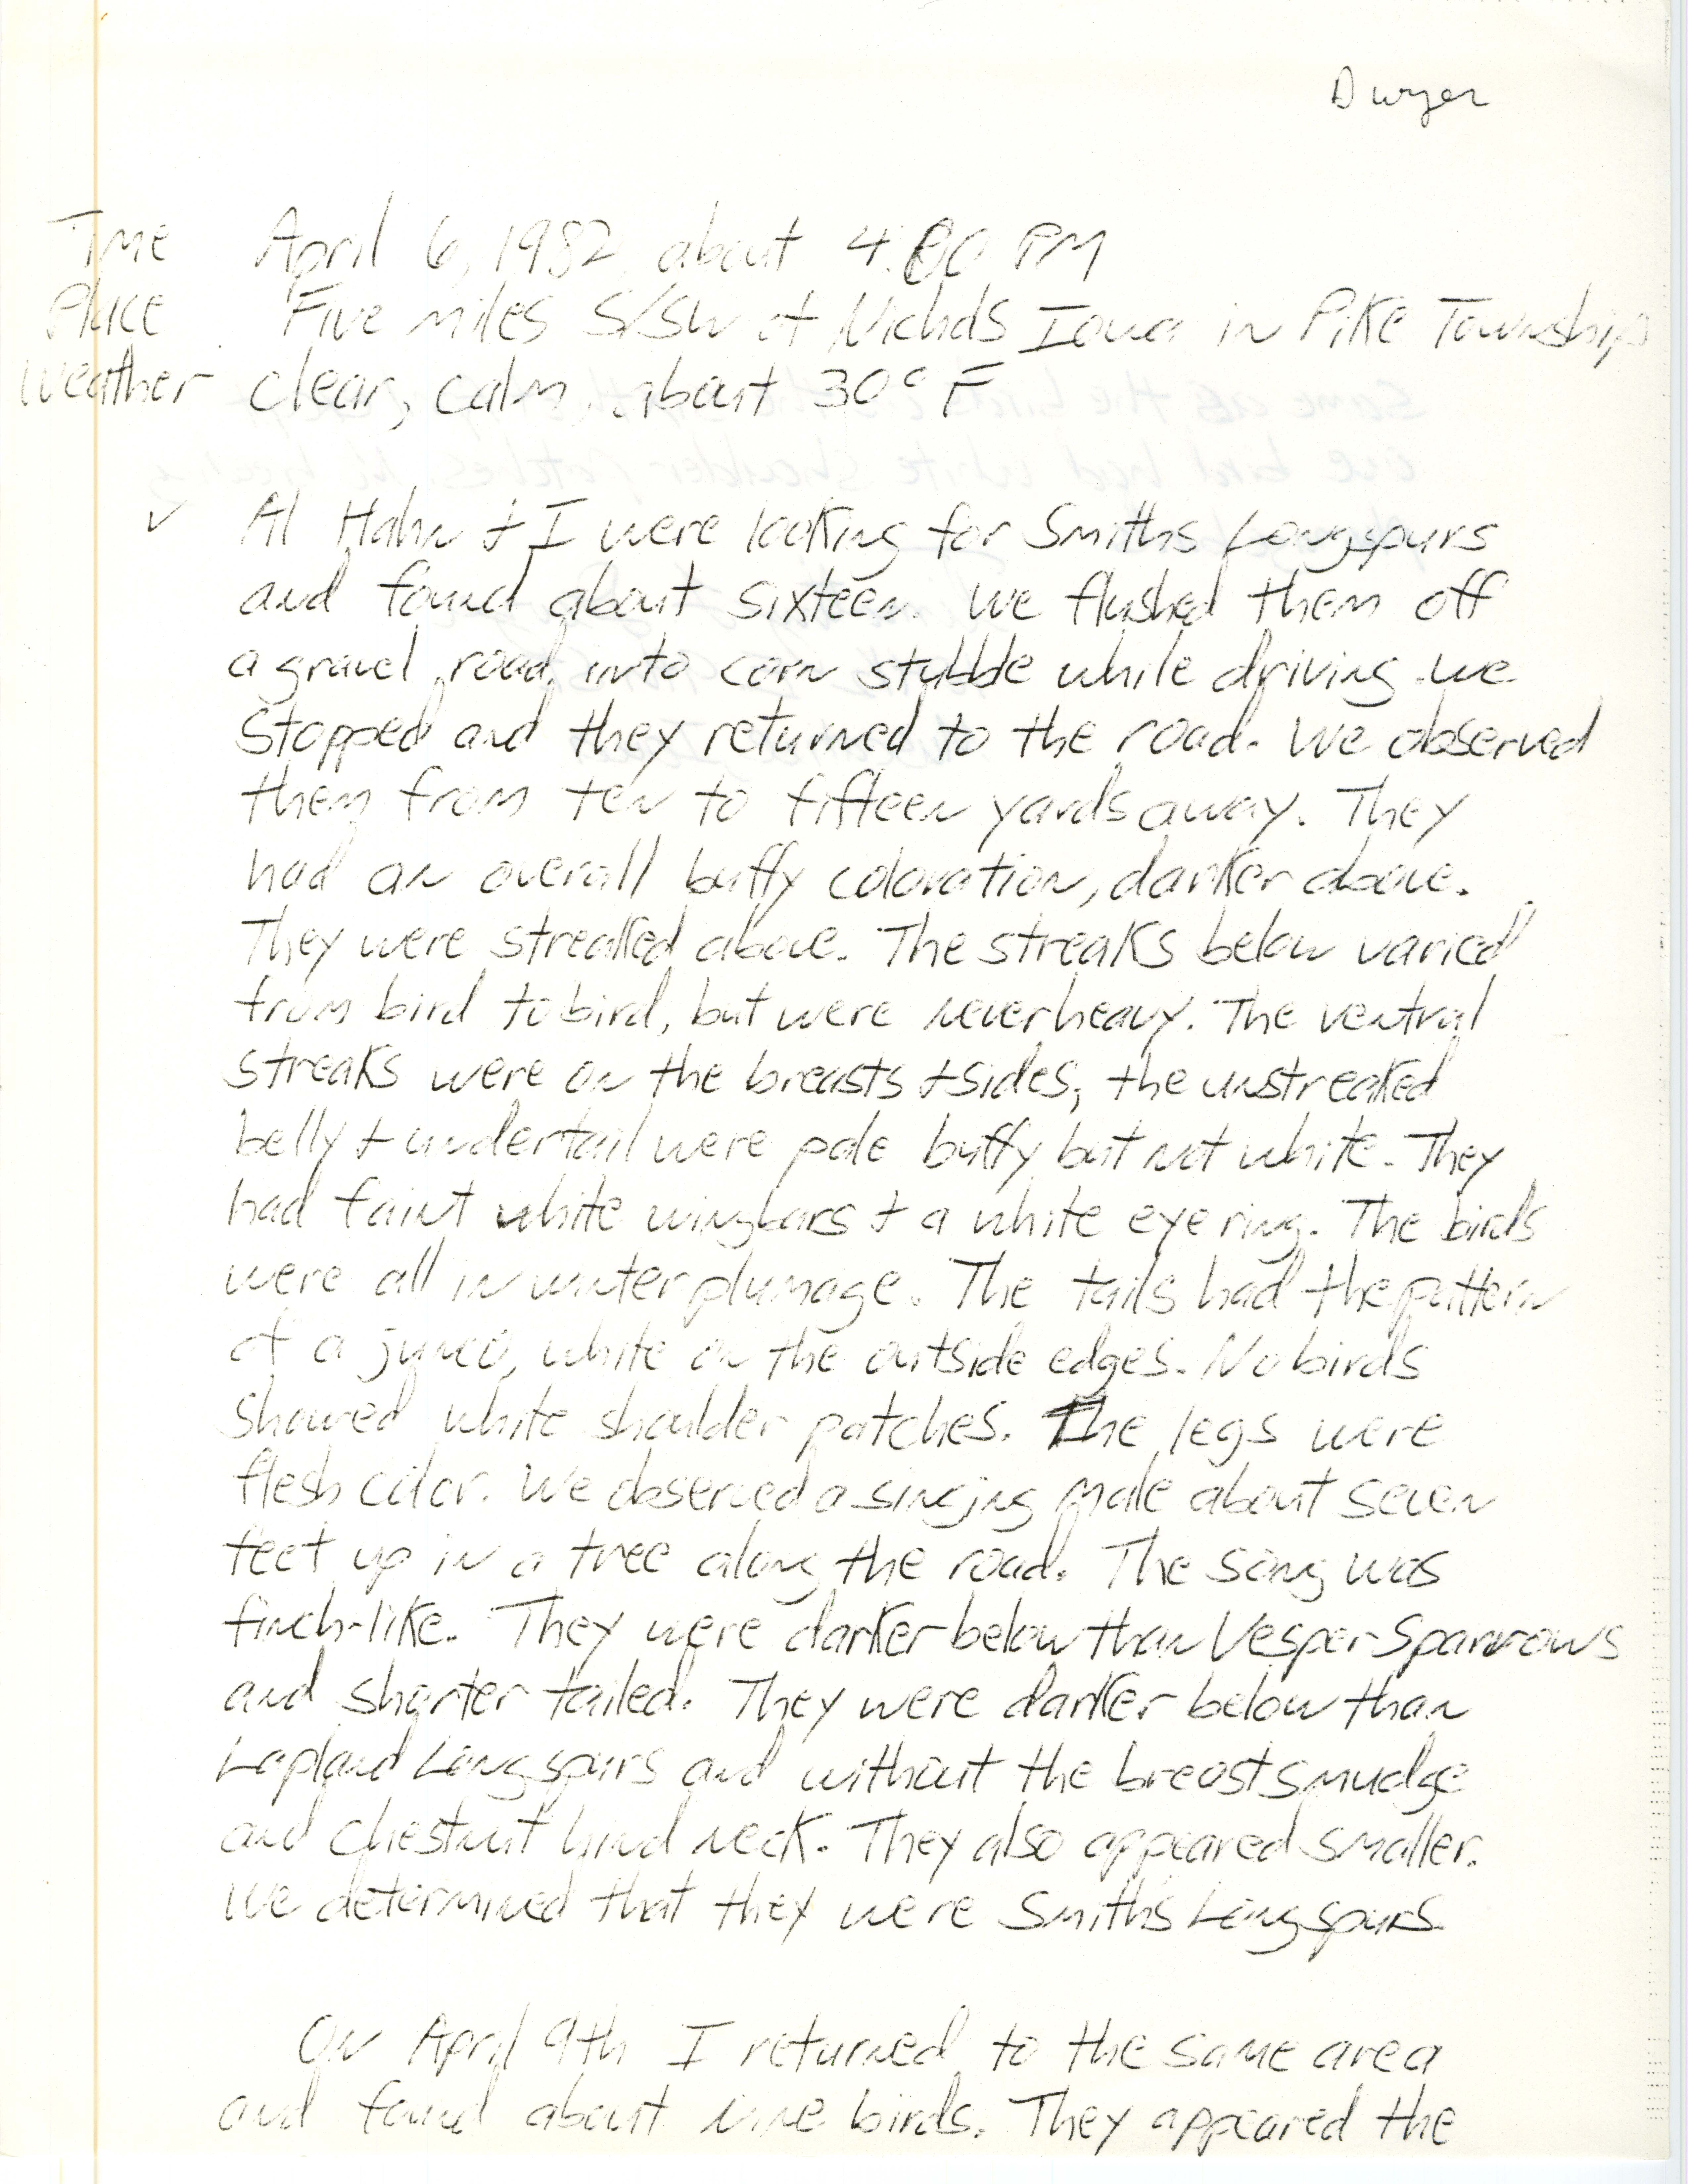 Field notes contributed by Timothy L. Dwyer, April 6, 1982